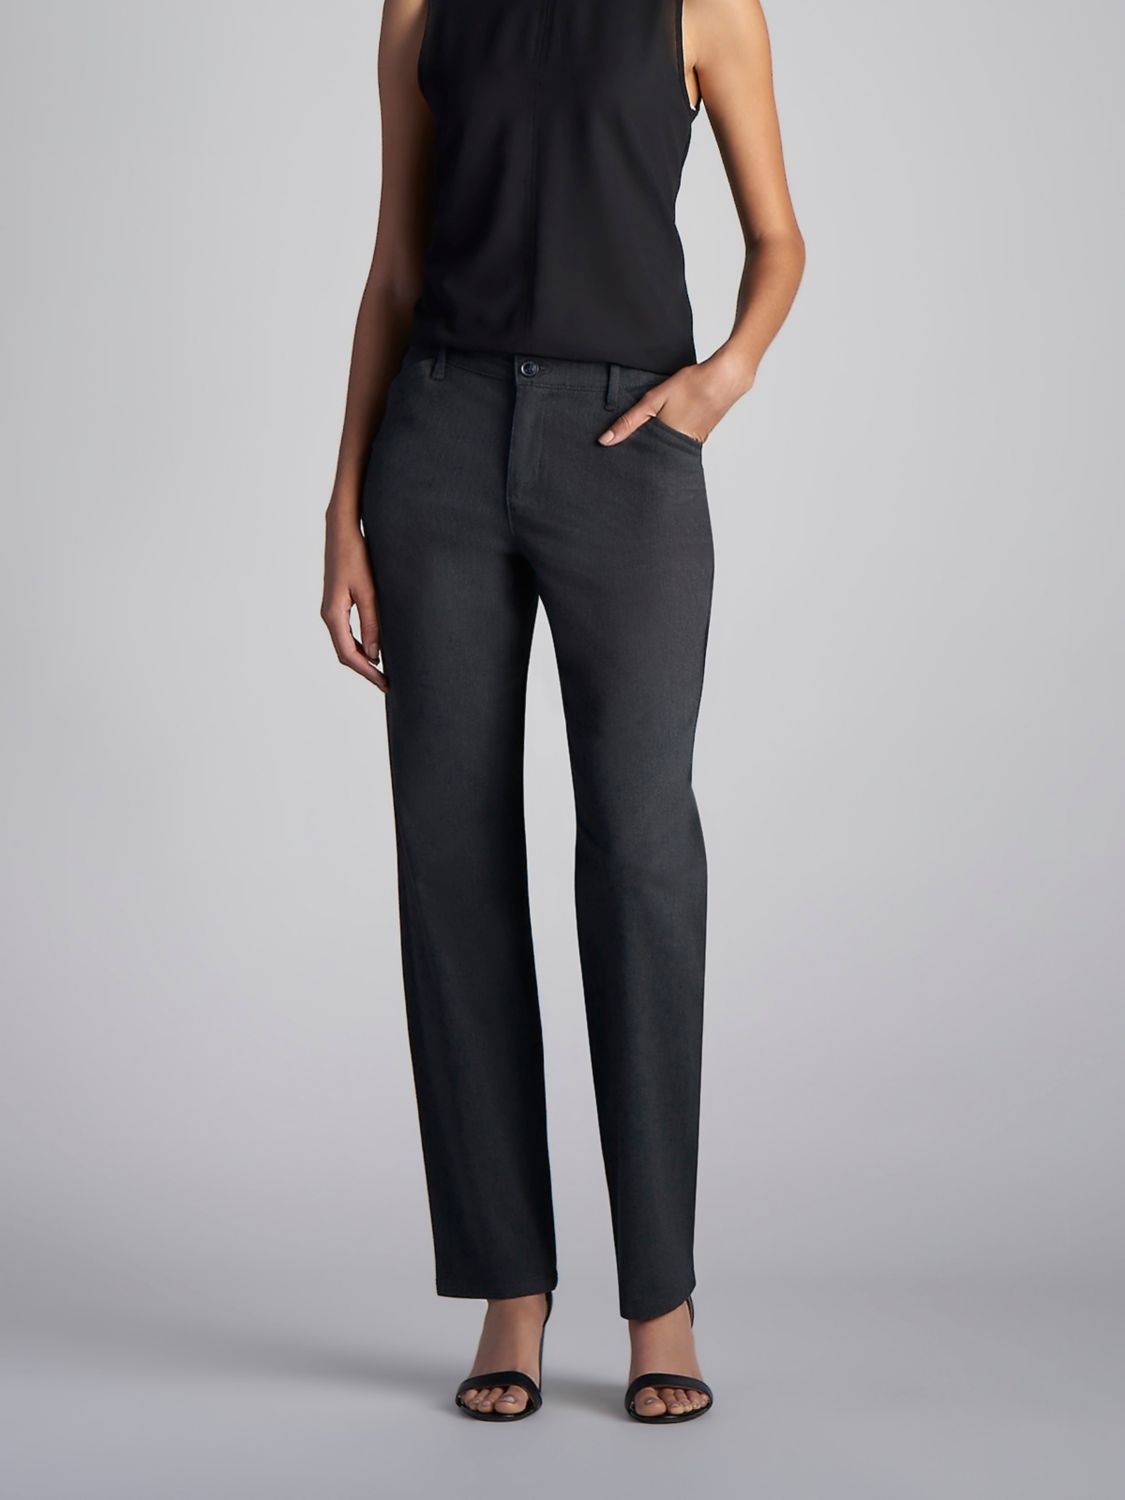 Relaxed Fit Straight Leg Pant All Day Work Pant in Charcoal Heather from Front View